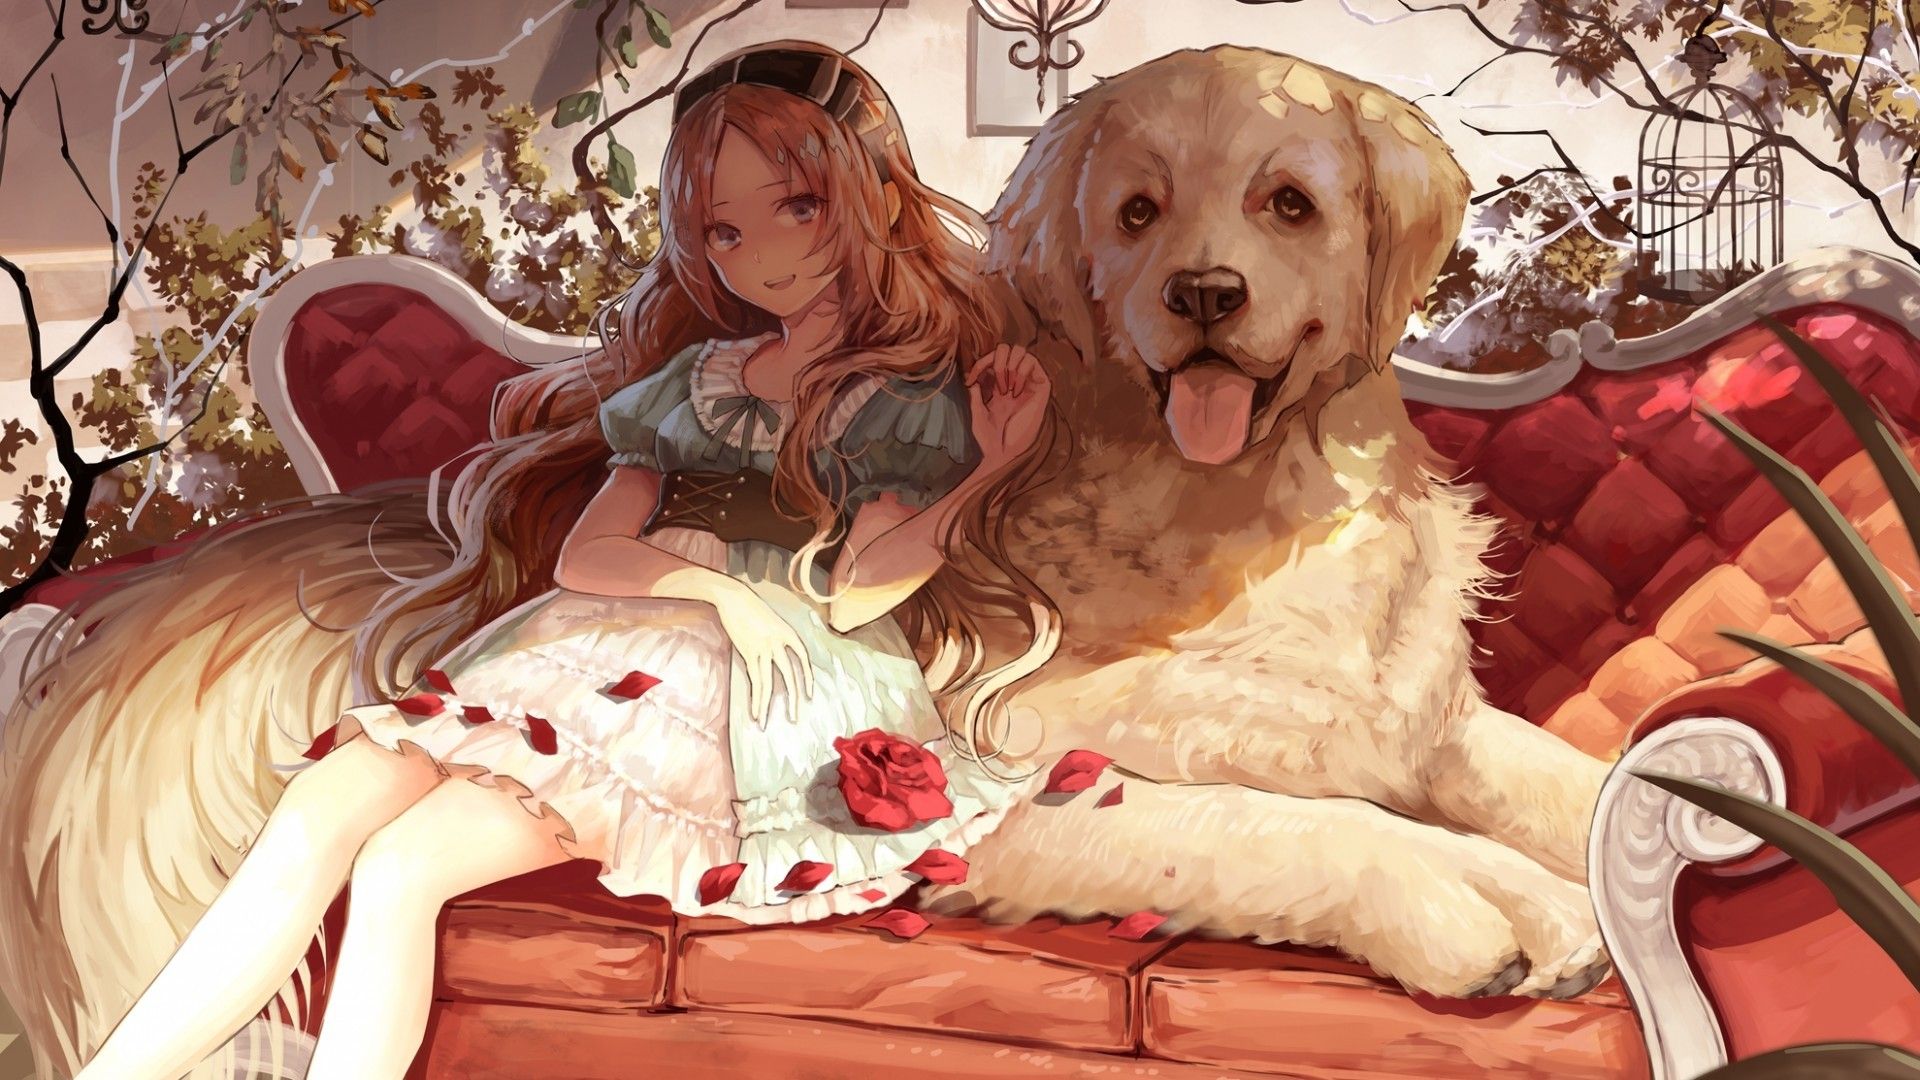 Download 1920x1080 Anime Girl, Blonde, Dog, Smiling, Cute, Flowers Wallpaper for Widescreen